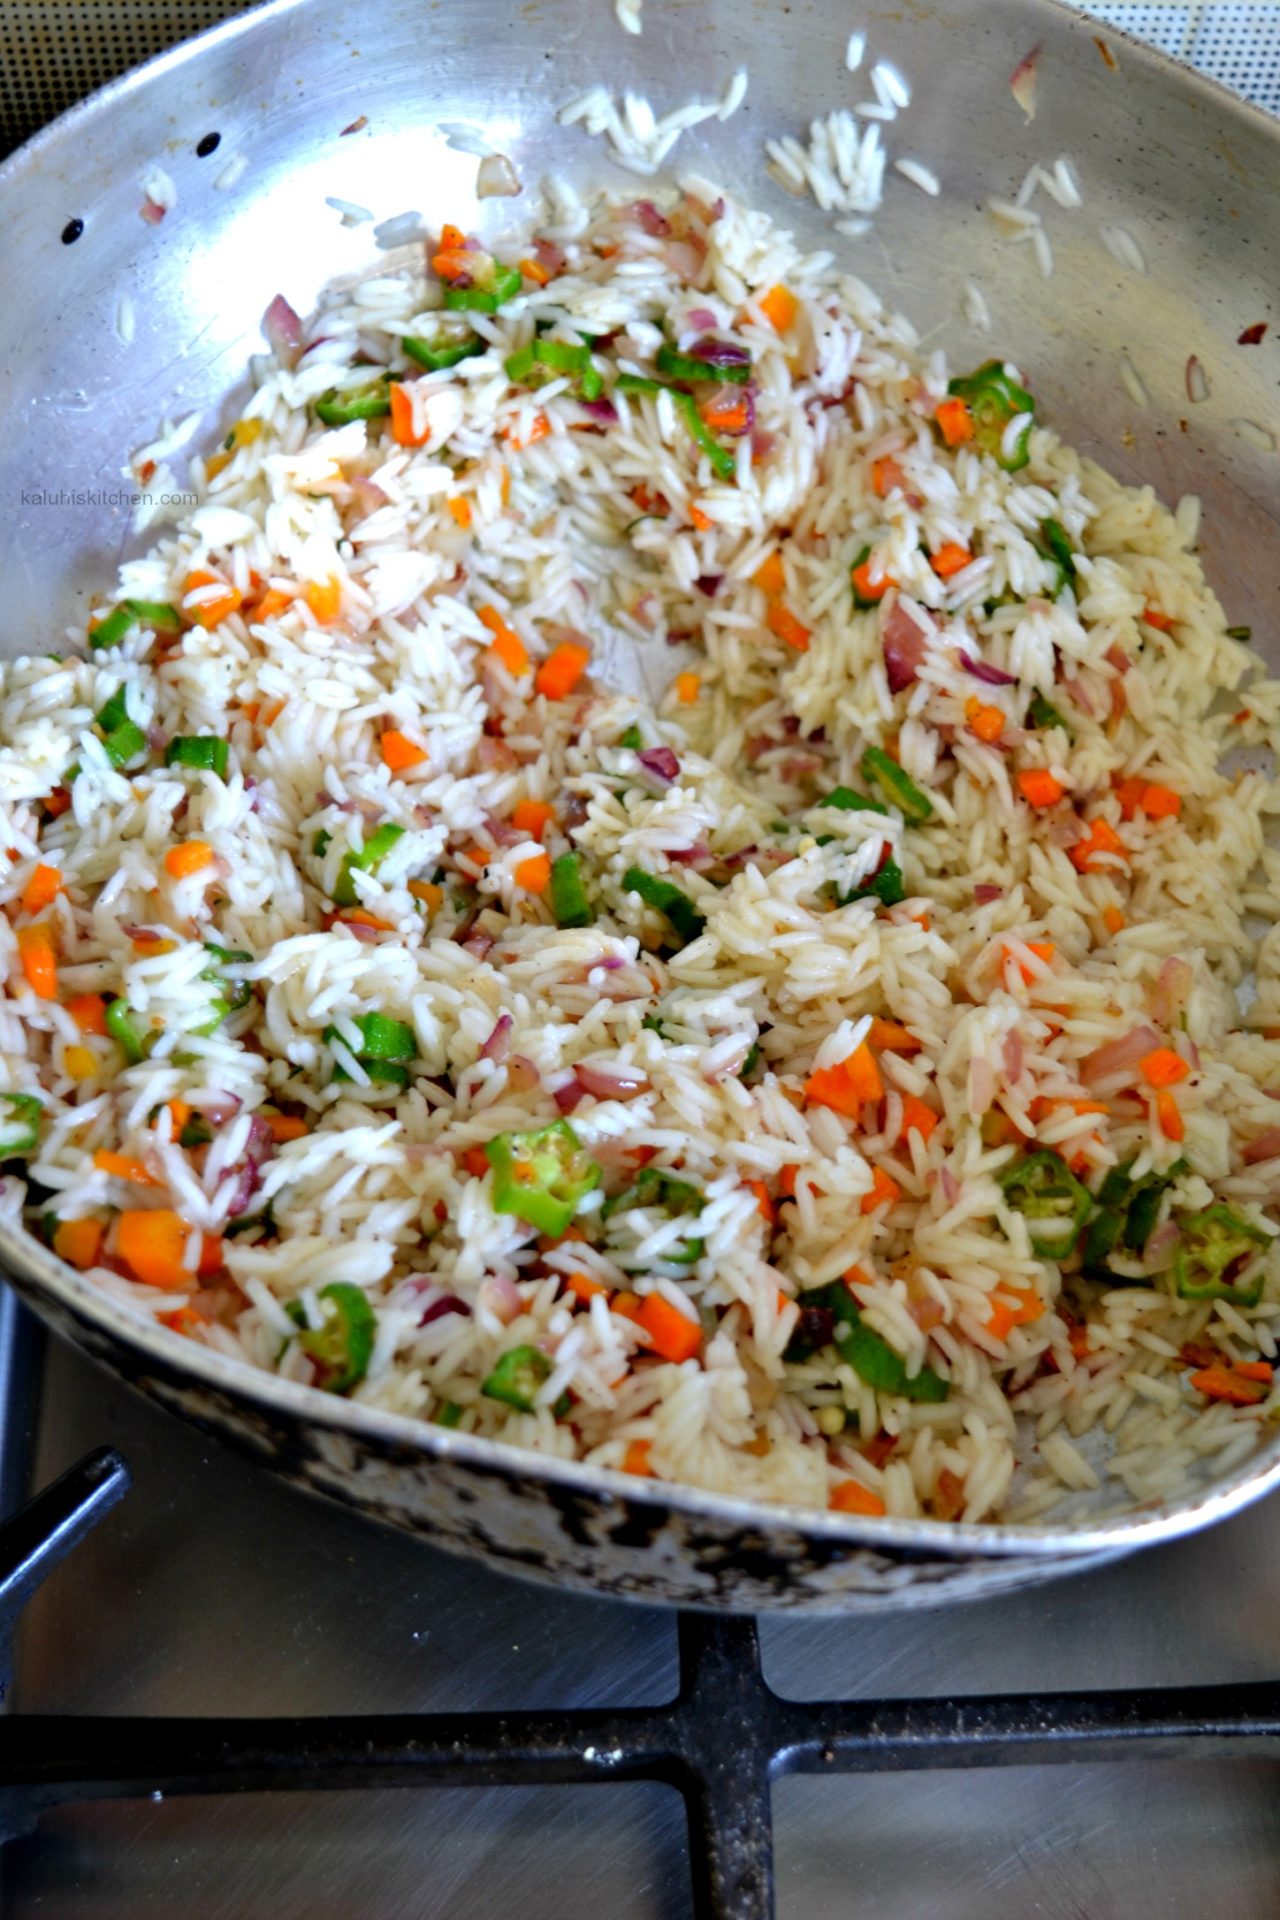 mix inthe cooked rice with the vegetables and mix it in until it is evenly distributed_rosemary and okra fried rice_kaluhiskitchen.com